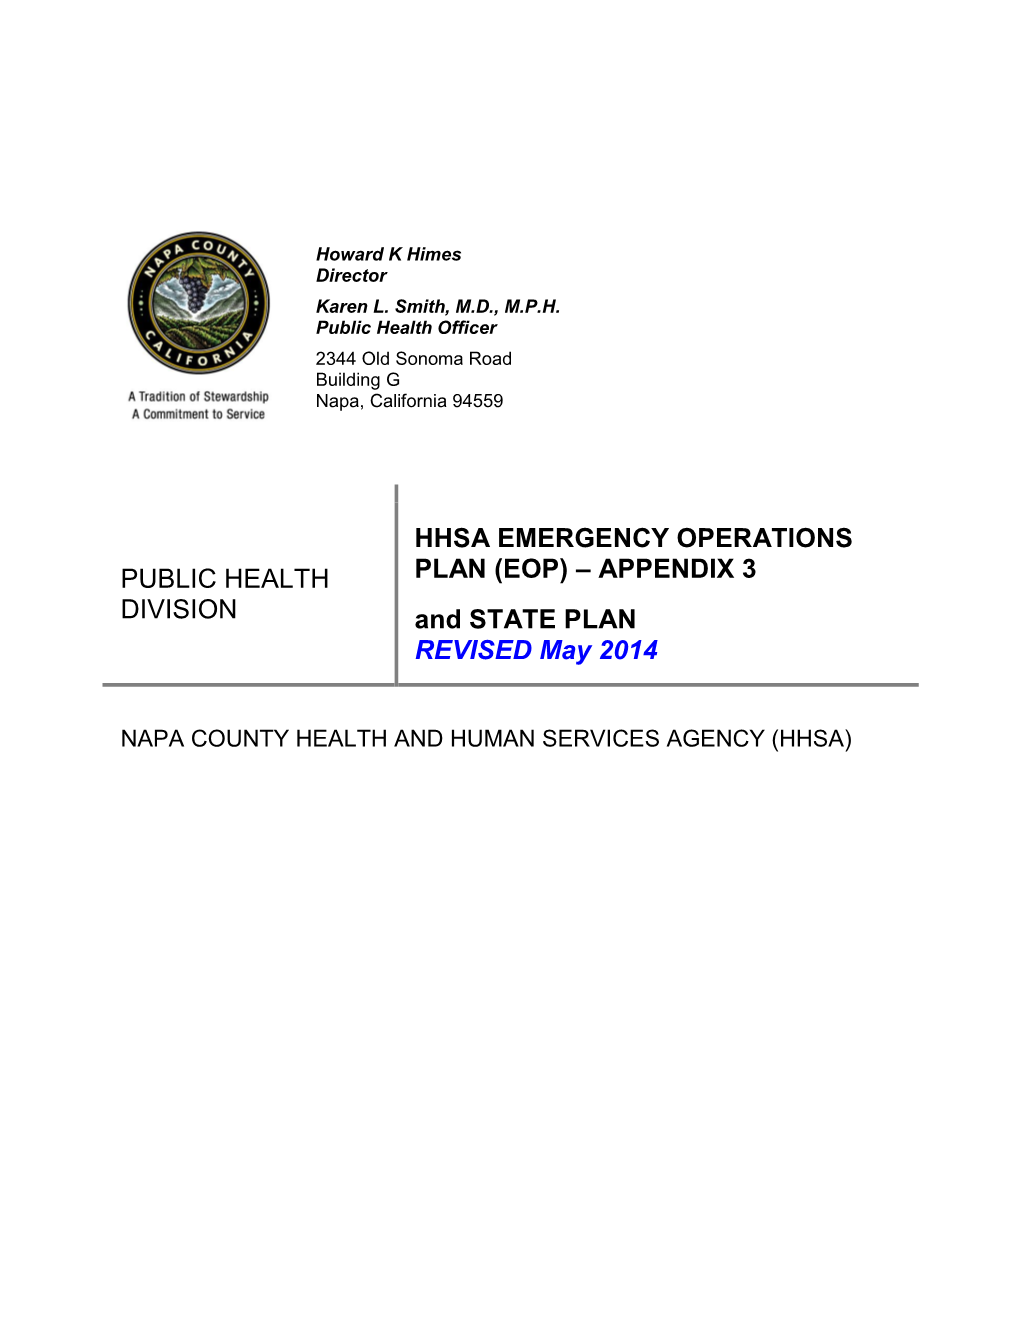 Public Health Division Hhsa Emergency Operations Plan